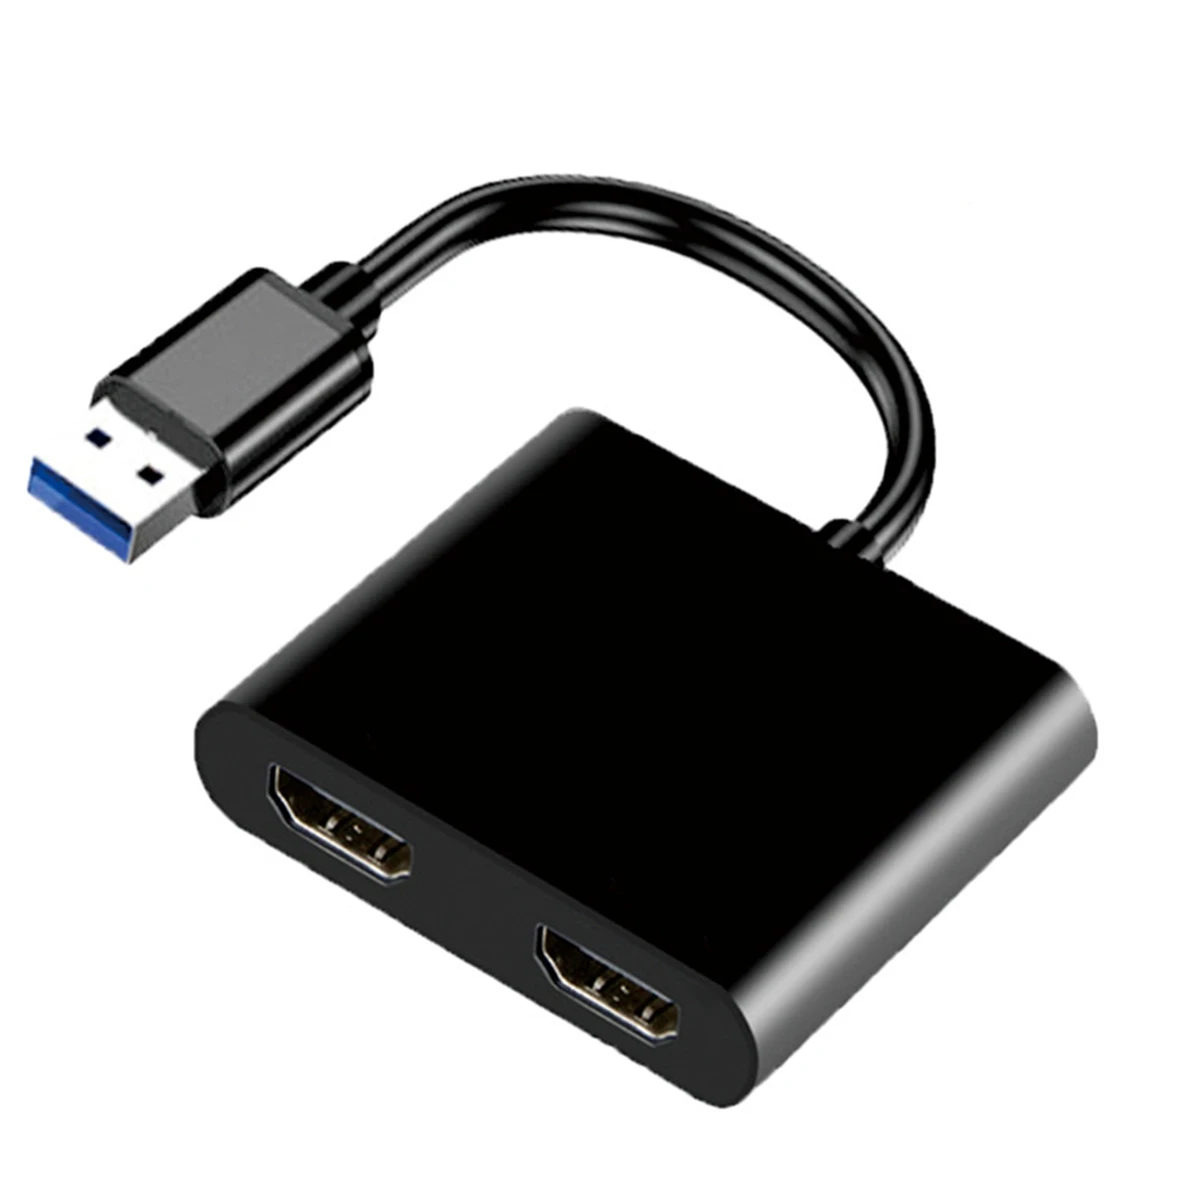 

USB HDMI-Compatible Converter 1920X1080P@60Hz USB3.0 to Dual HDMI-Compatible with One to Two On-Screen Display Adapters